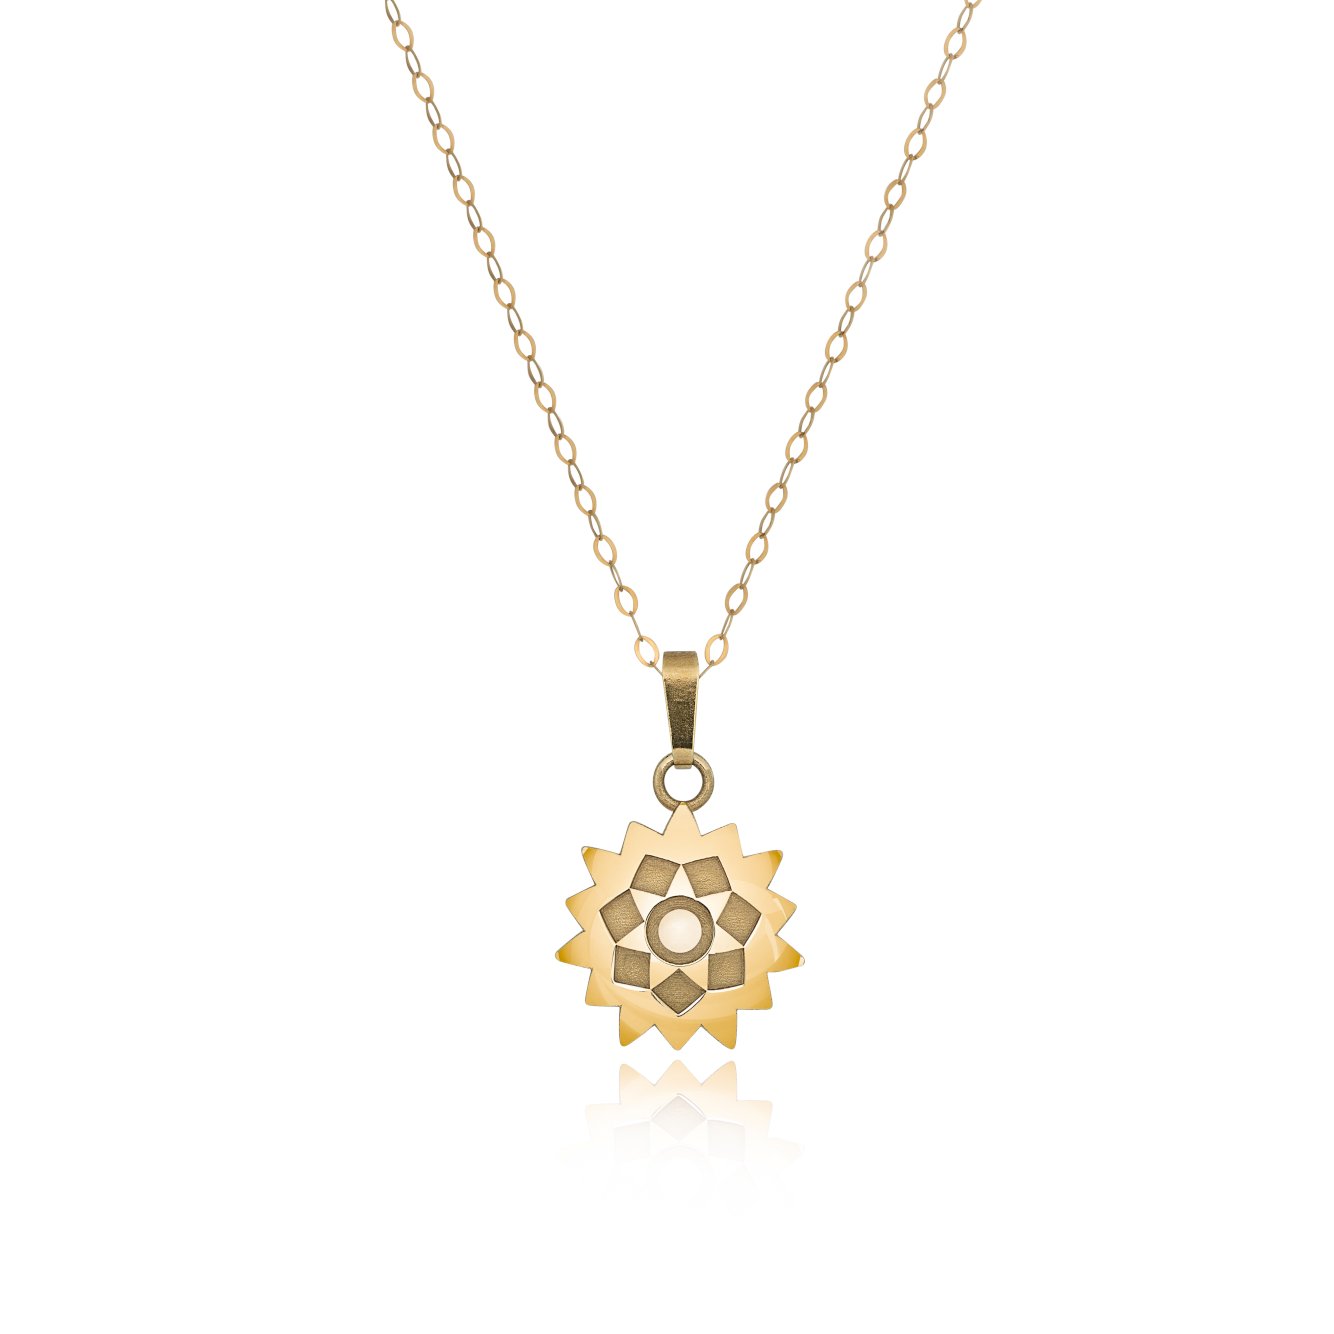 Starburst Necklace - Small - Solid Yellow Gold